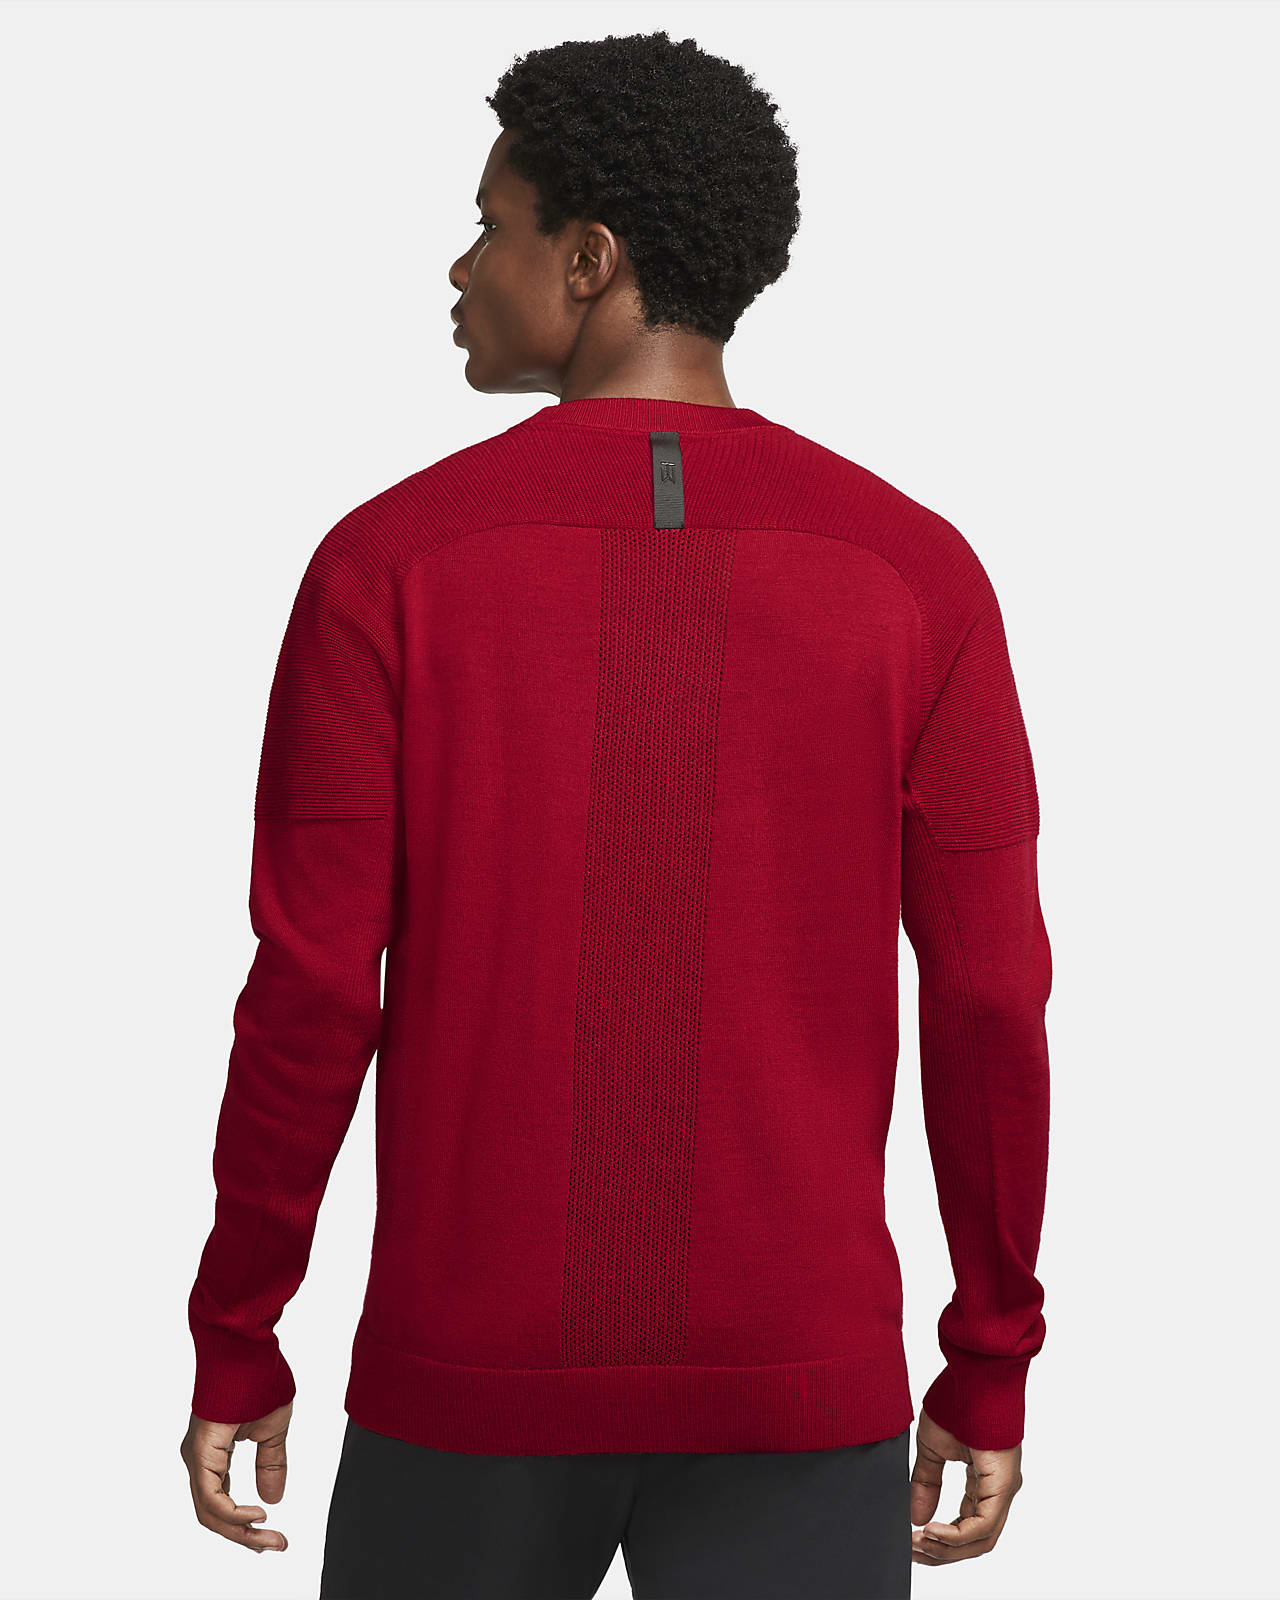 tiger woods pullover sweater